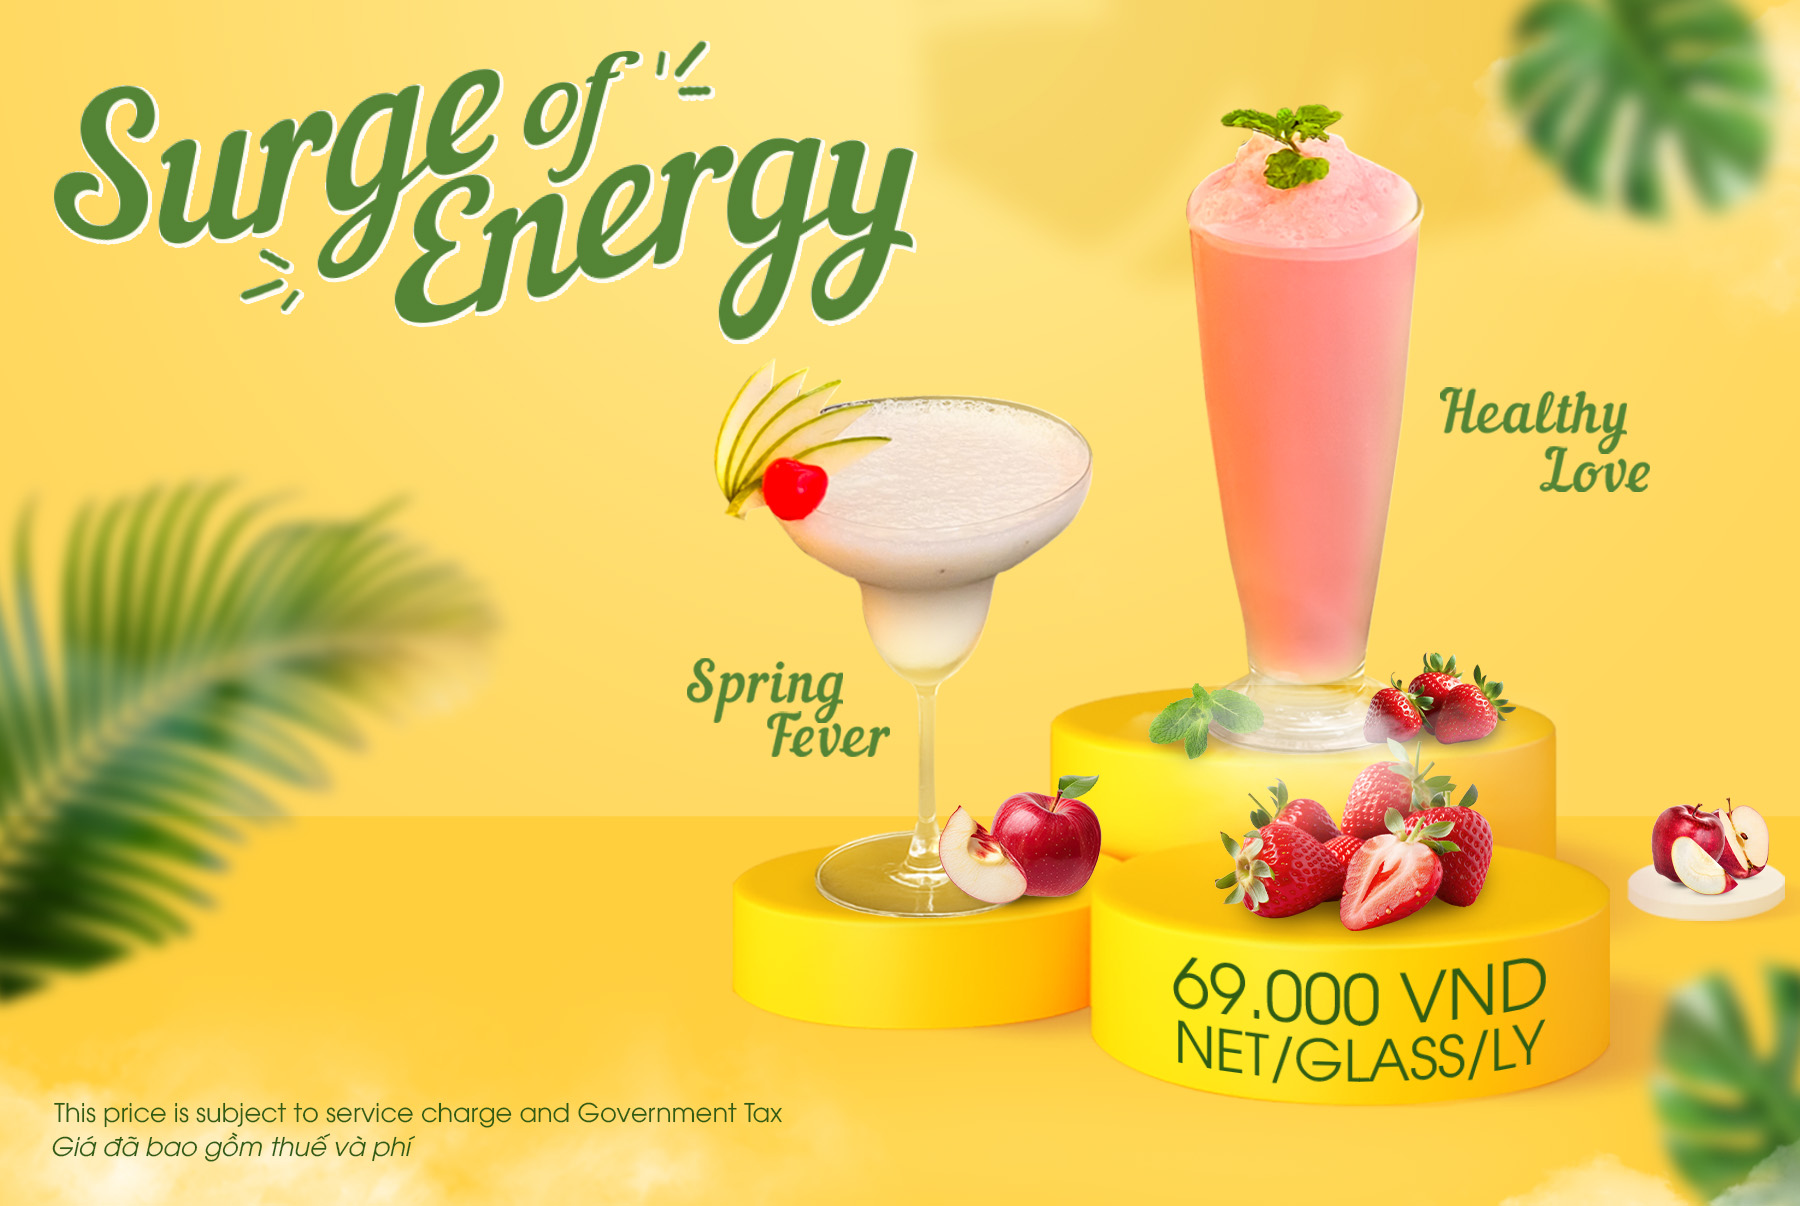 "Surge of Energy" Offer - Healthy Smoothies